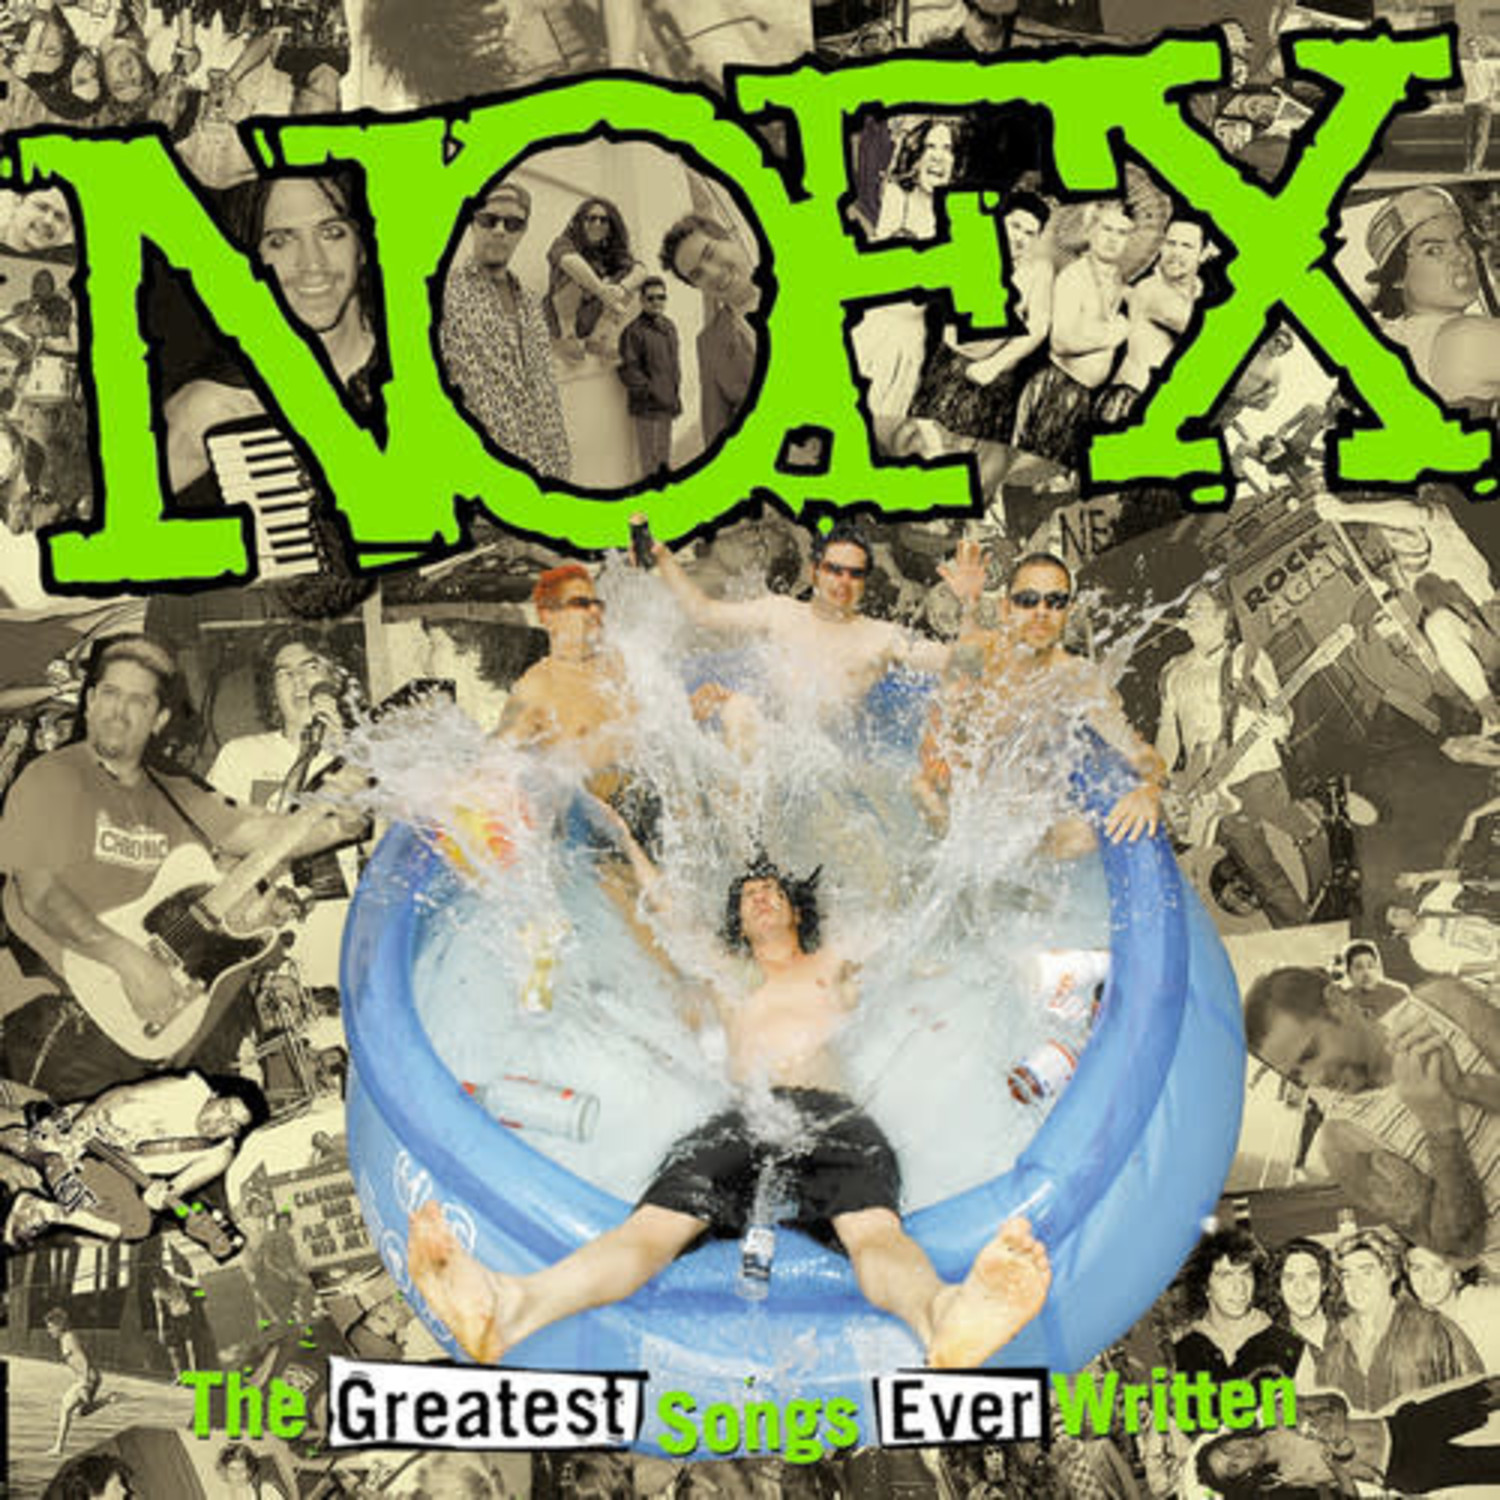 NOFX - Greatest Songs Ever Written (by Us) 2LP - Wax Trax Records